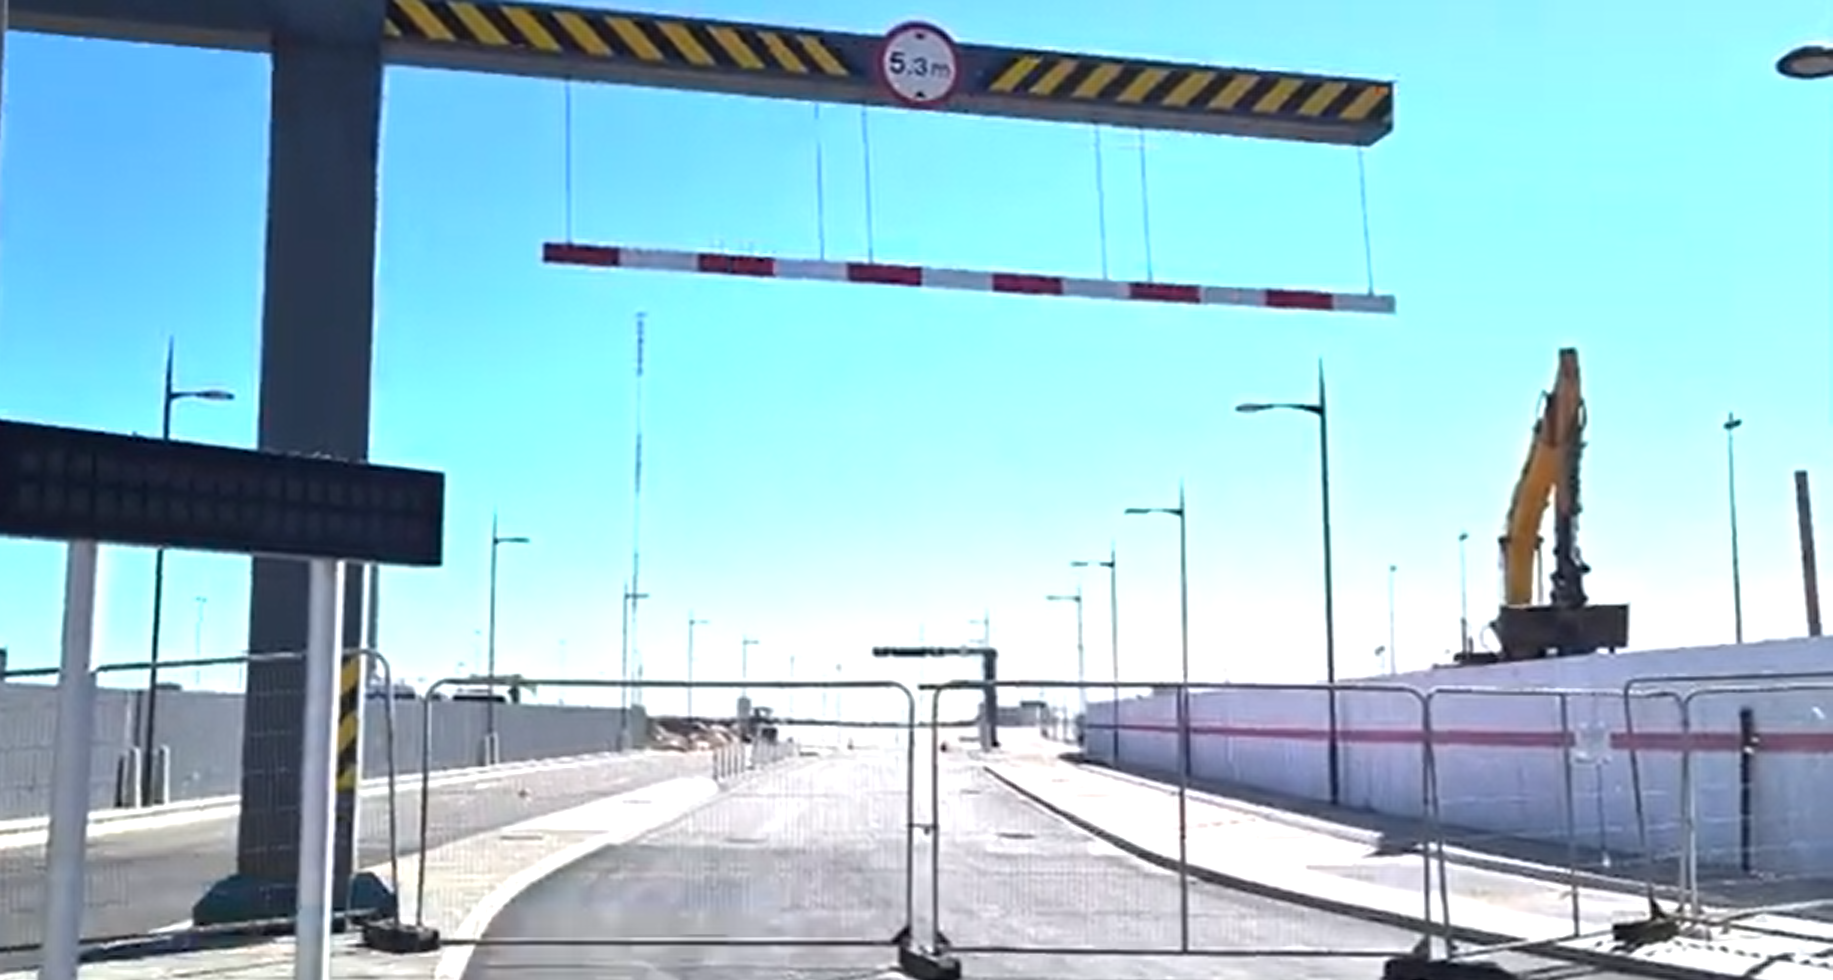 Eastside runway tunnel to finally open at end of March, Gibraltar Chief Minister says